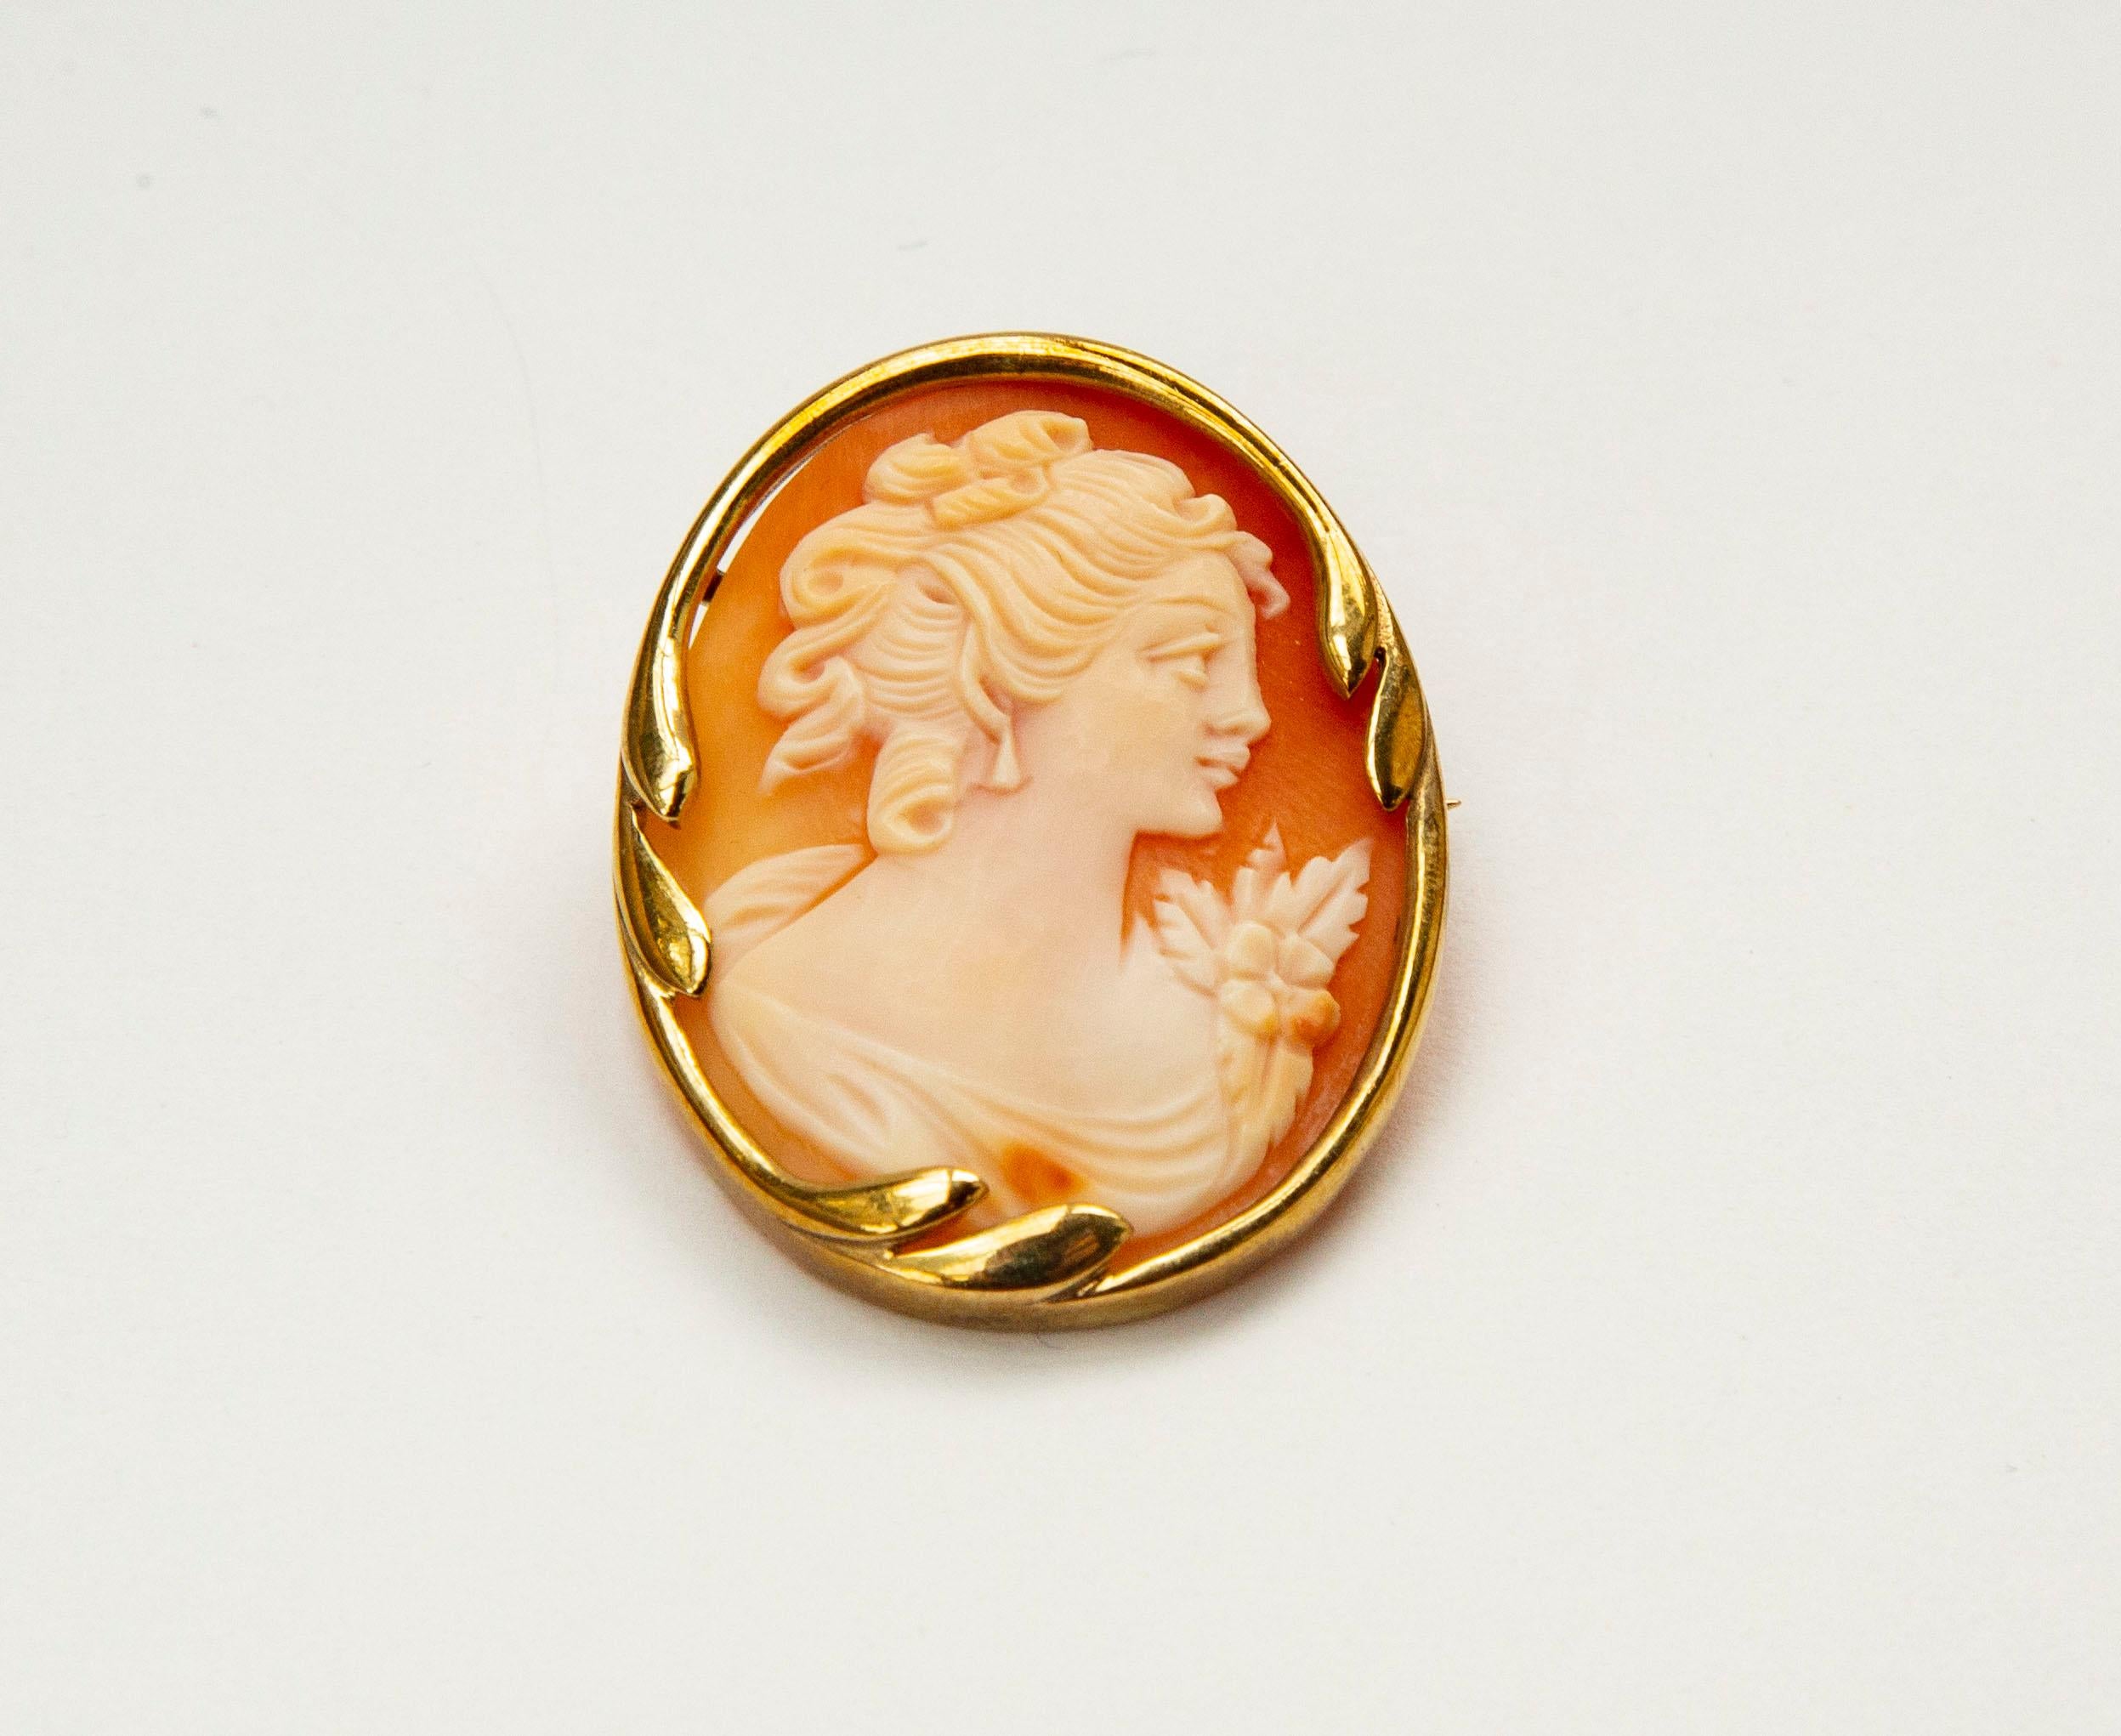 A vintage (ca. 1950s) brooch/pendant. The item is made of 8 karat yellow gold with a shell cameo featuring a finely carved female silhouette. The item is marked with 333 that stands for the 8 karat gold content and with the manufacturer's initials